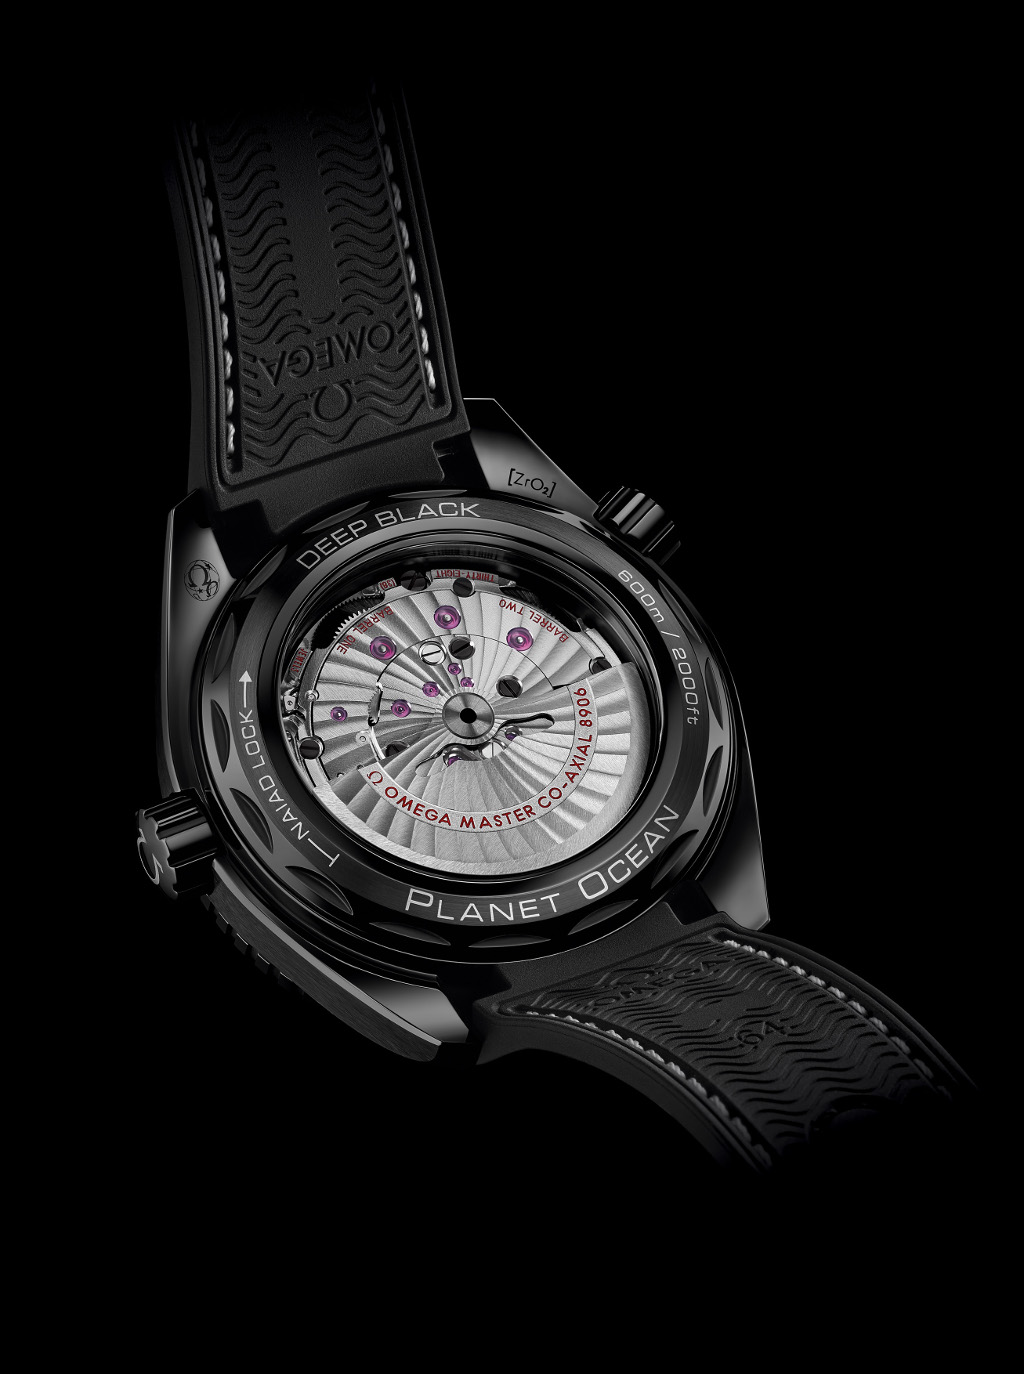 The movement of the "Deep Black", with some pretty interestng touches as compared to the usual Co-Axial Movements. 